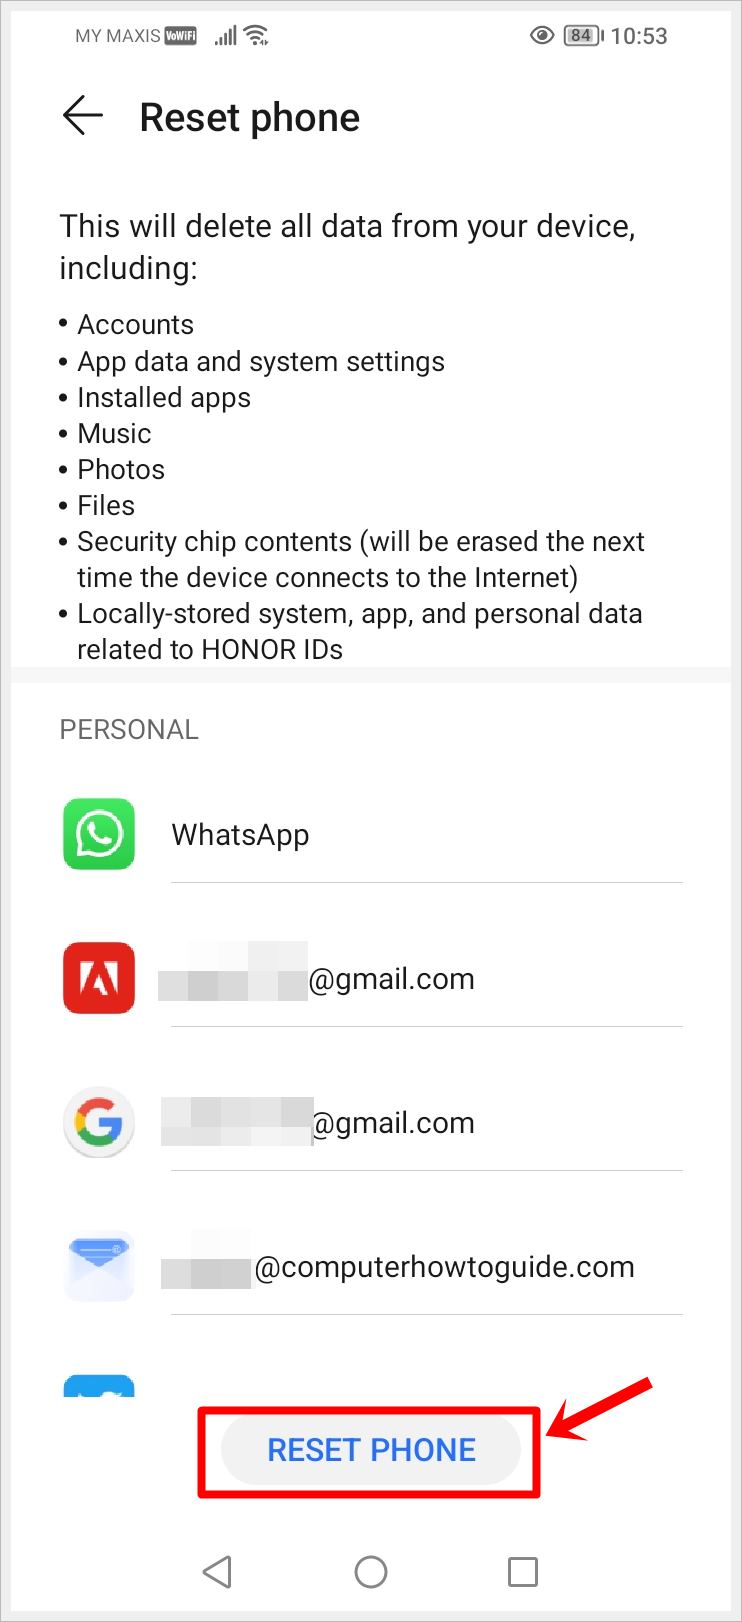 How to Fix "Google Play Services Keeps Stopping" Error: This image shows the "Reset phone" page of an Android phone, with the "Confirm Resetting Phone" button highlighted.